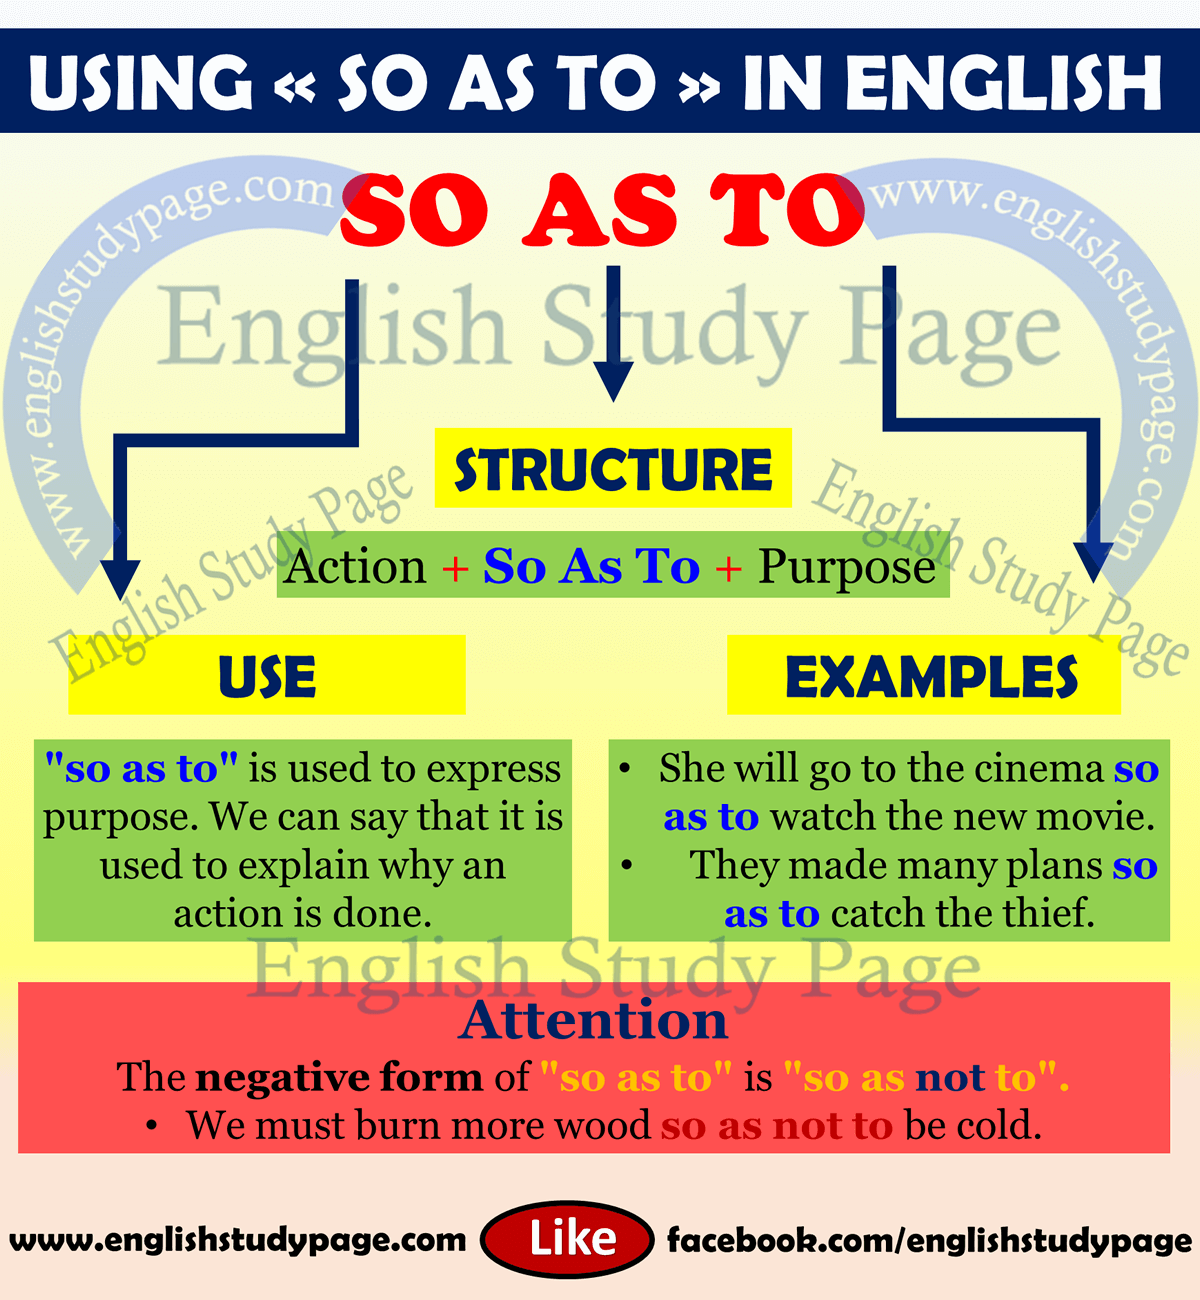 Using “So As To” in English